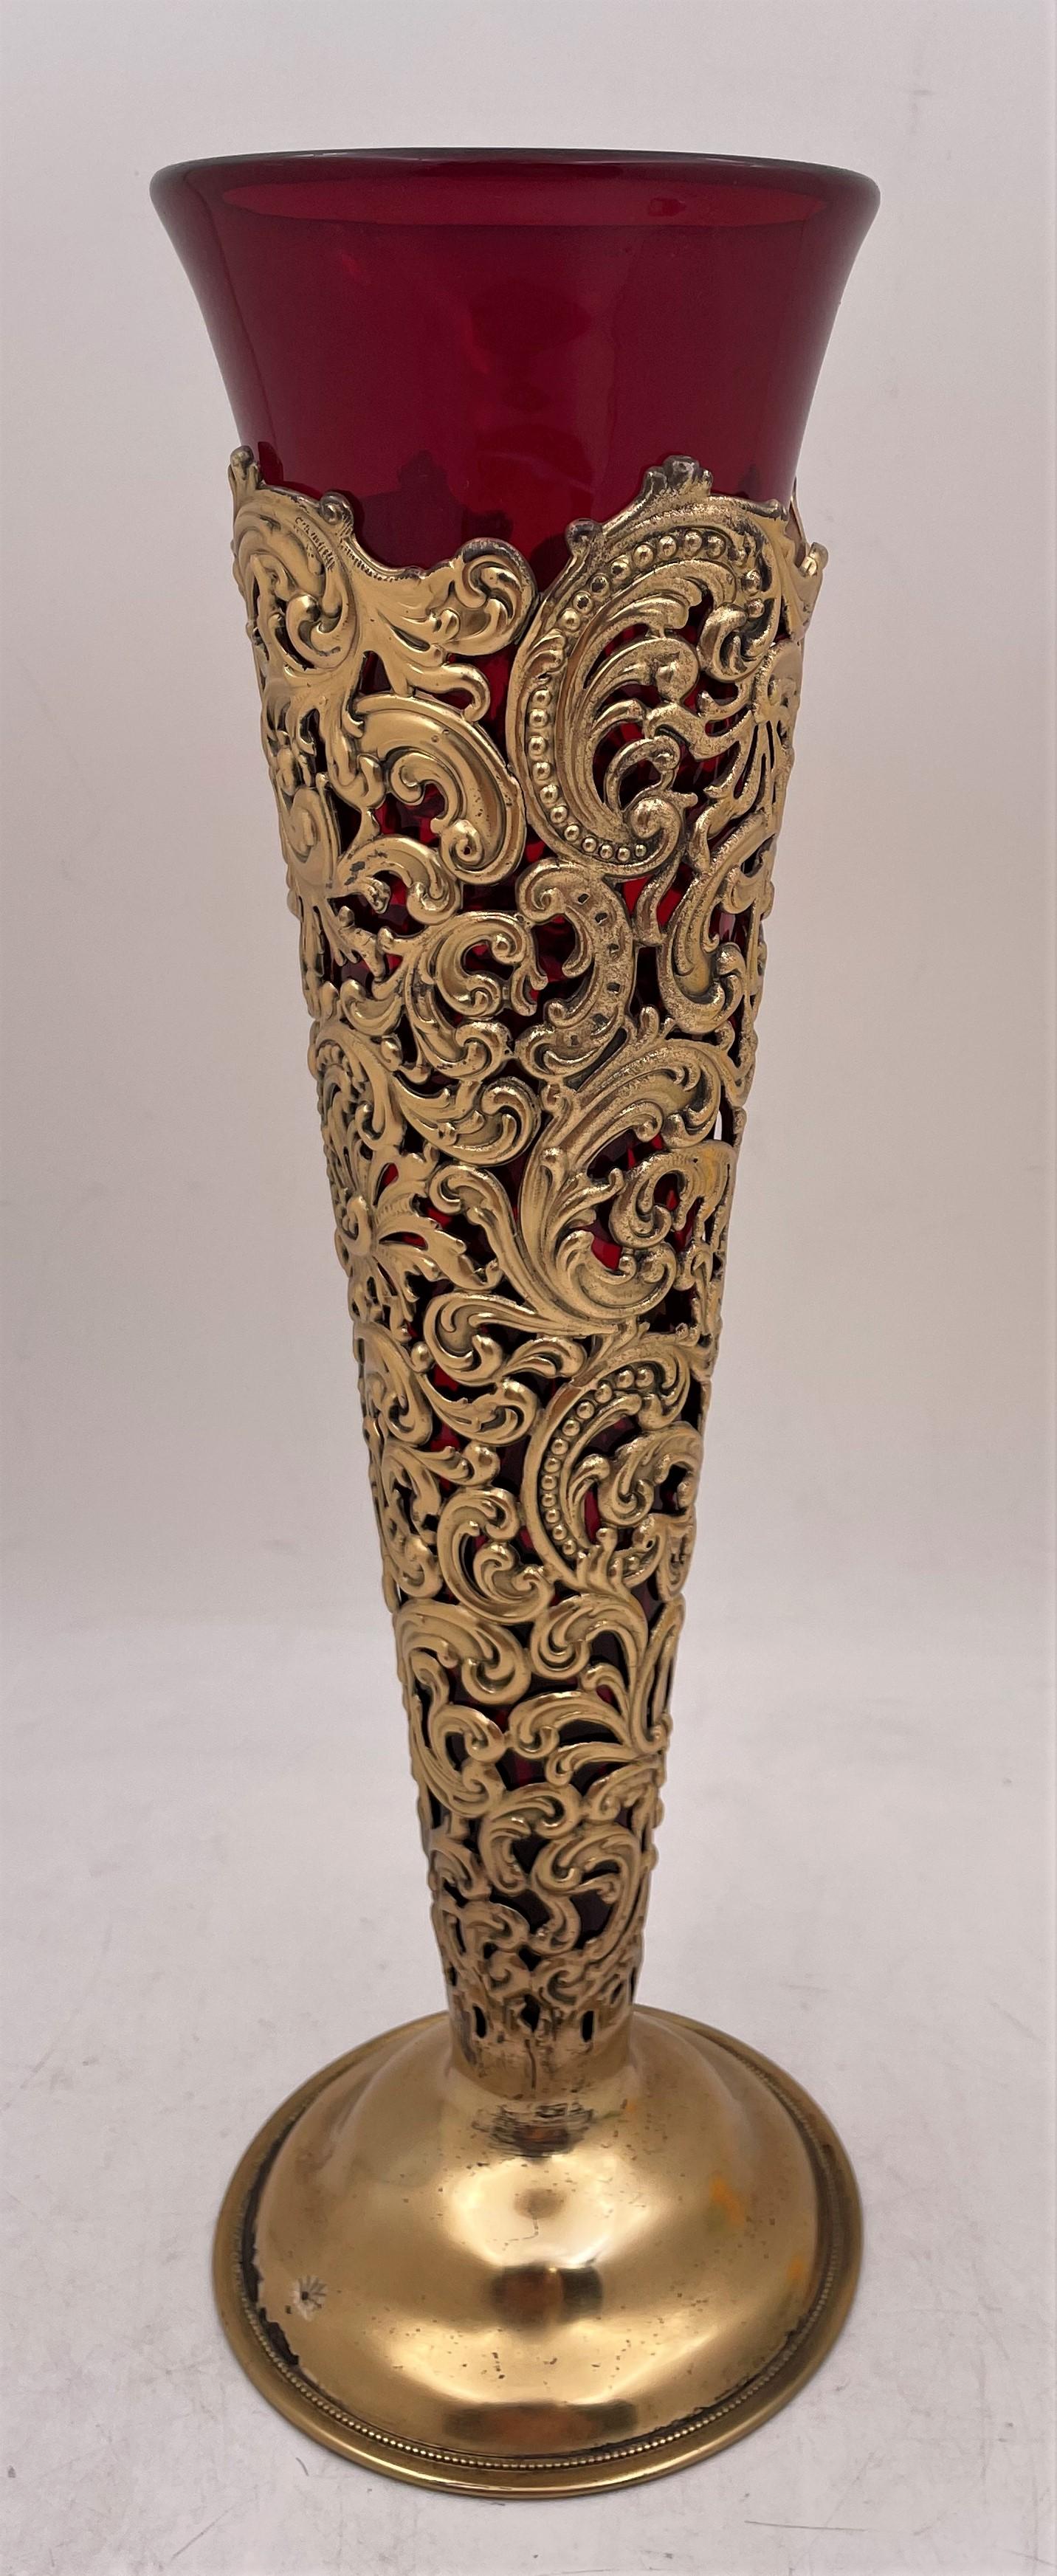 Dominick & Haff vermeil (gilt-sterling silver) vase from 1898 in pattern number 326A, with a richly adorned body showcasing elaborate, slightly raised, scroll-like motifs. It comes with a removable, red glass liner, measures 12 1/2'' in height (14